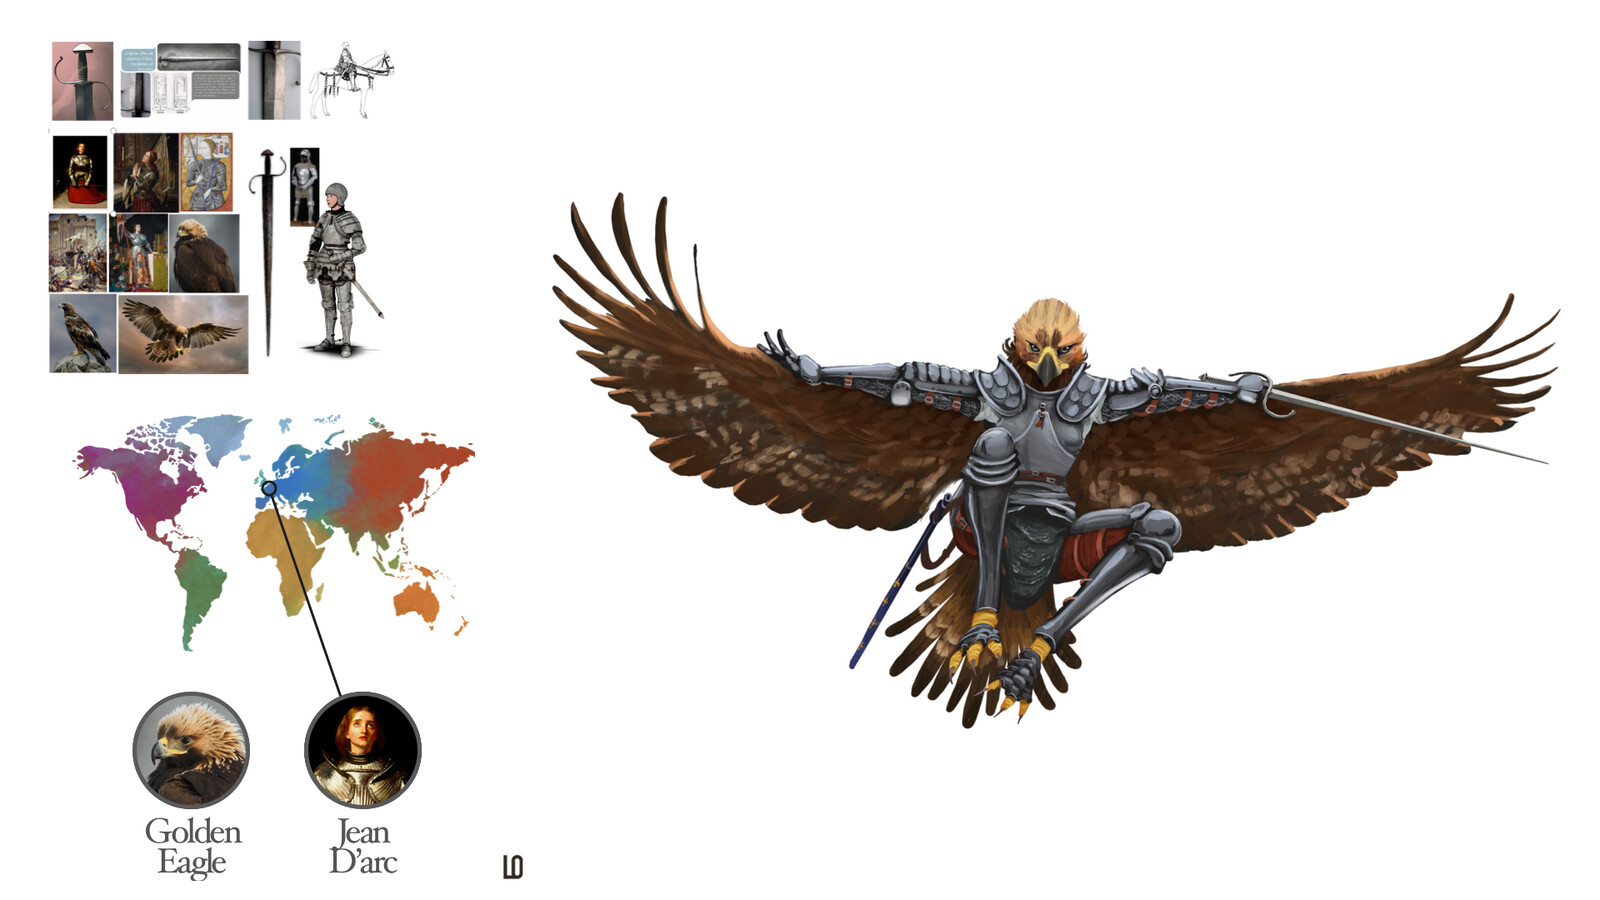 Jean the Golden Eagle info &amp; references